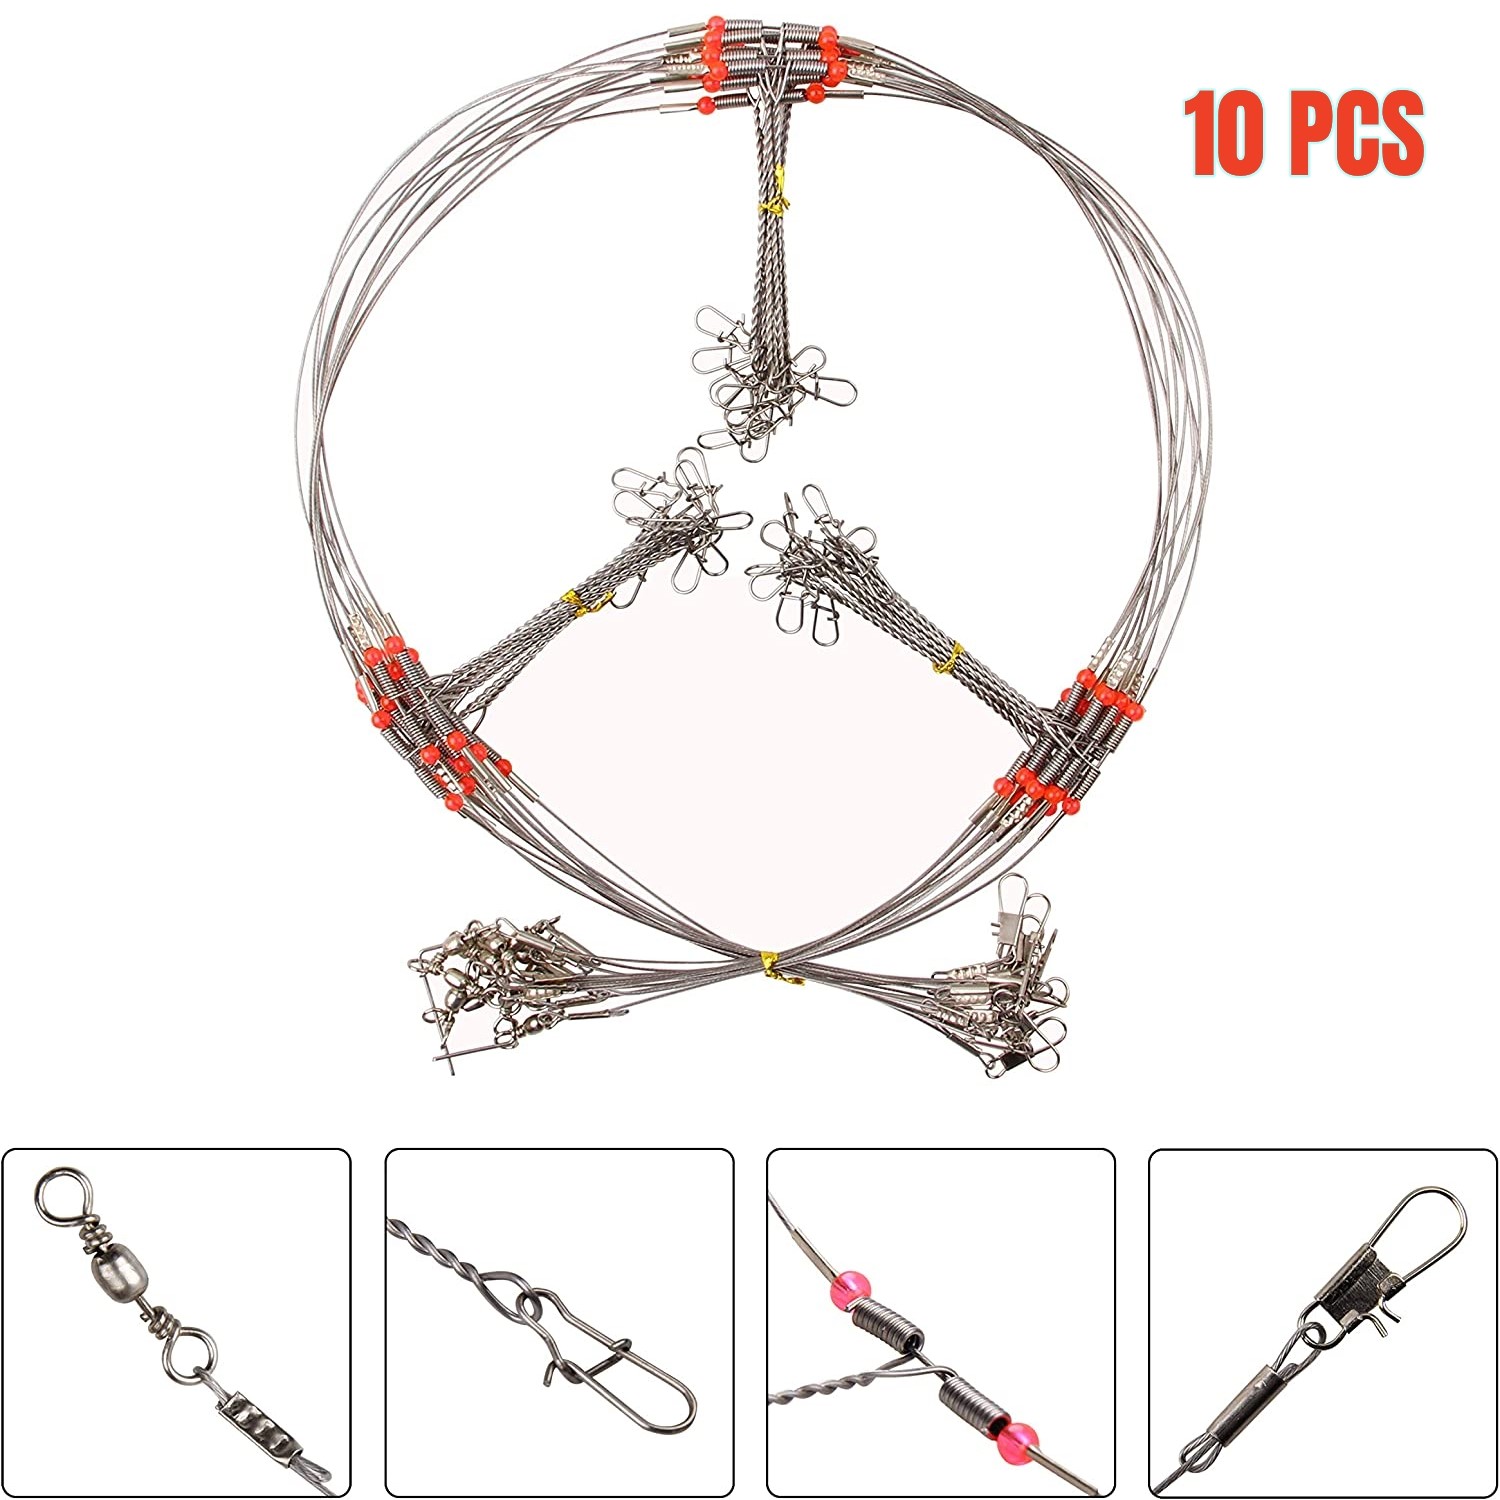 10Pcs Sea Fishing Stainless Steel 2 / 3 / 4 Arms Fishing Line Rig